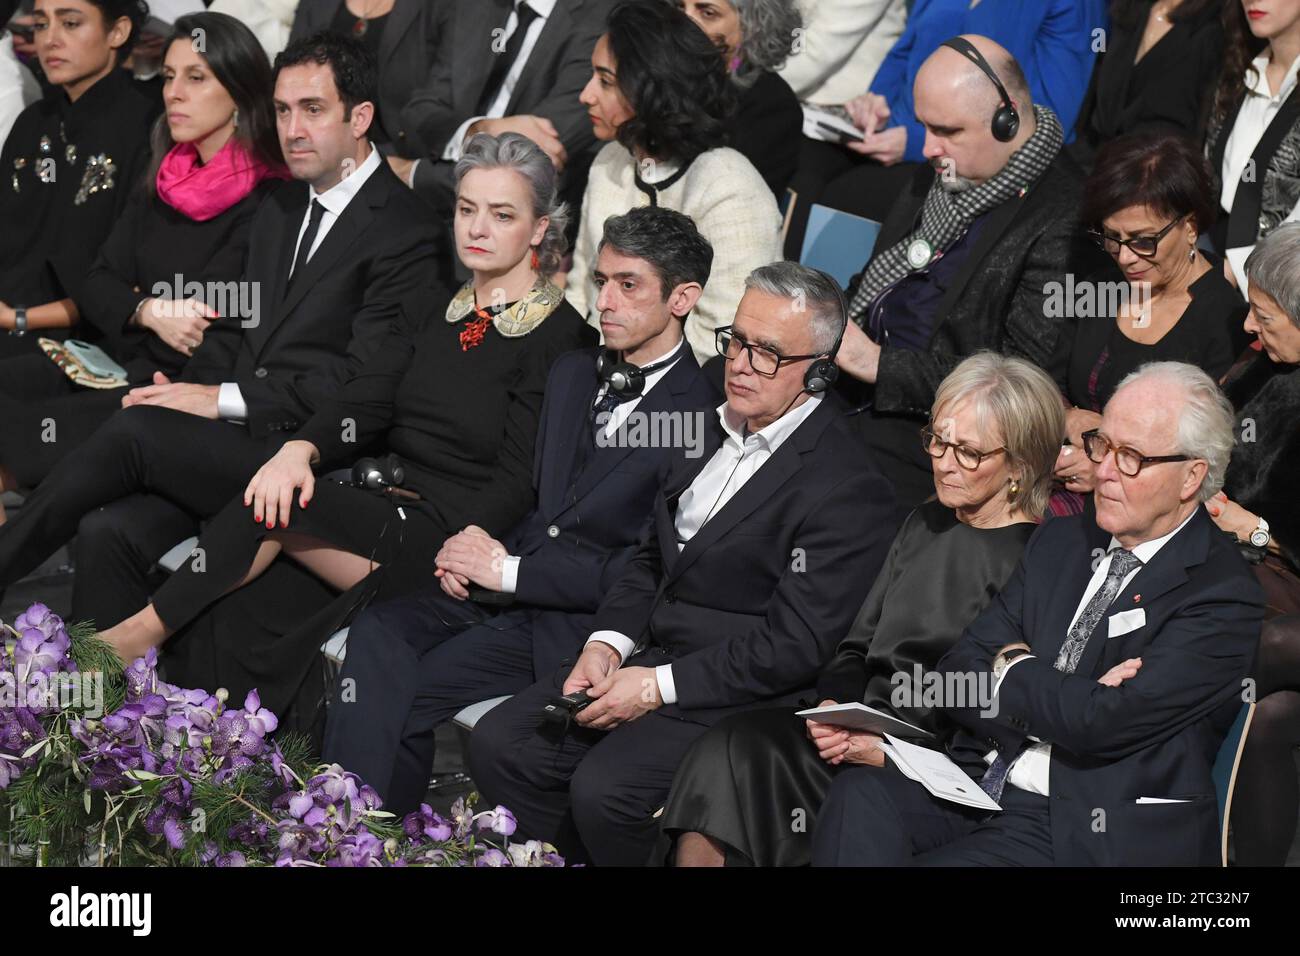 Oslo, Norway. 10th Dec, 2023. Hamidreza Mohammadi and Taghi Rahmani attend The Nobel Peace Prize ceremony for Iranian activist Narges Mohammadi at the Nobel Institute in Oslo, Norway. 2023 Nobel Peace Prize winner Narges Mohammadi is imprisoned and is therefore represented by her family. Mohammadi receives the peace prize for her fight against the oppression of women in Iran and the fight for human rights and freedom for all. December 10, 2023. Photo by Paul Treadway/ Credit: UPI/Alamy Live News Stock Photo